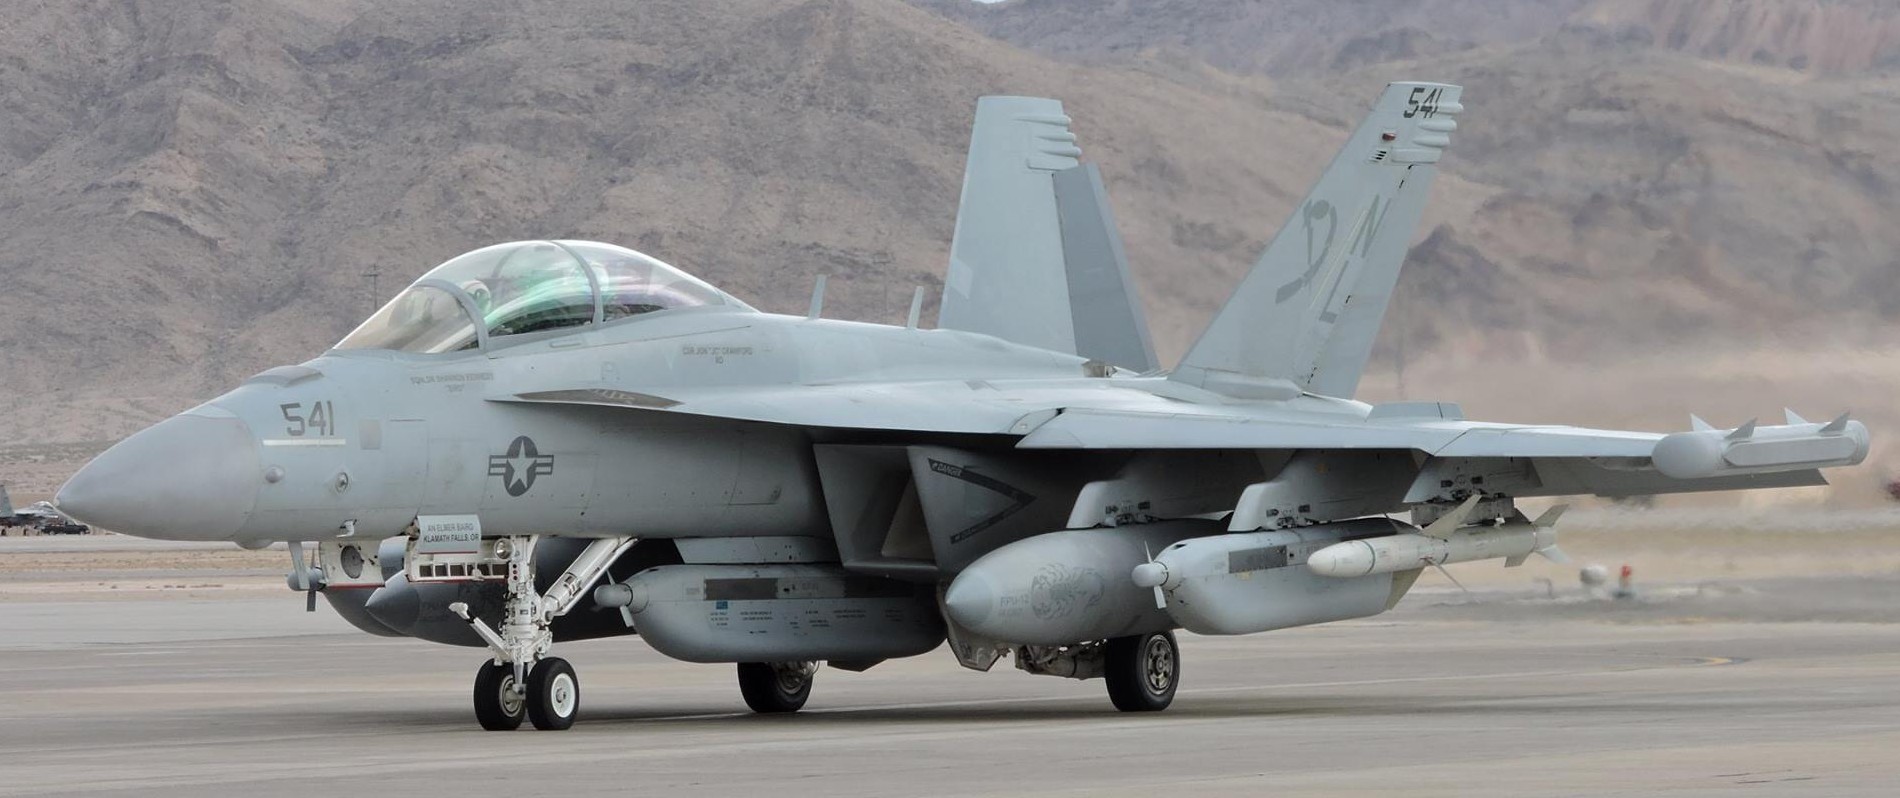 vaq-132 scorpions electronic attack squadron vaqron us navy boeing ea-18g growler exercise red flag nellis afb nevada 30